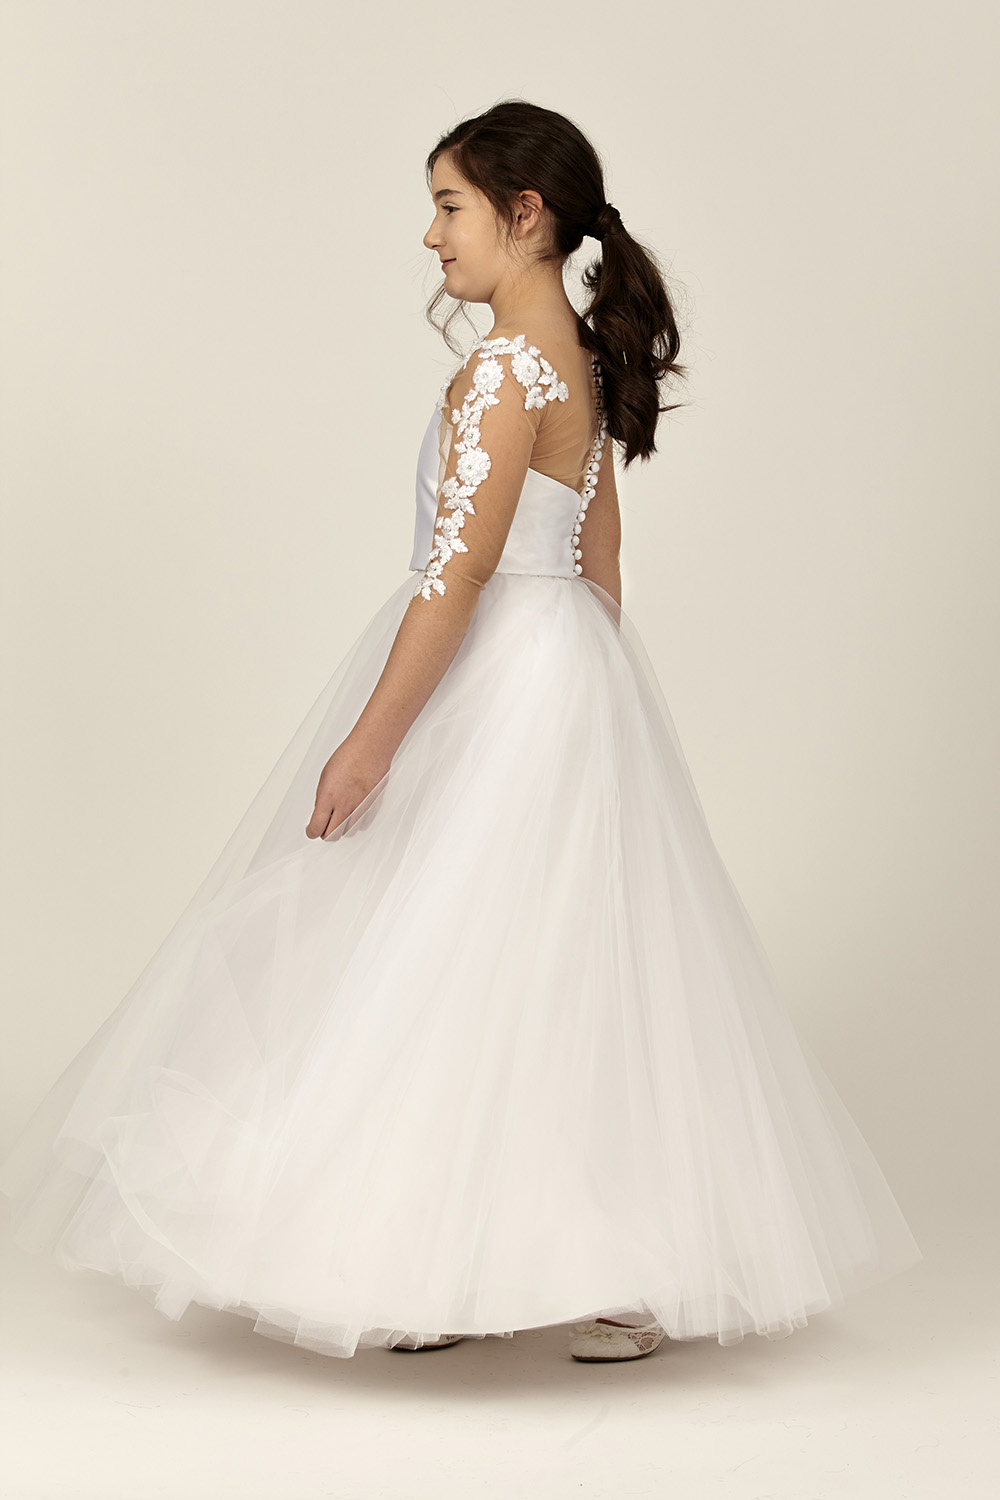 Finding the Perfect Communion Gown Image